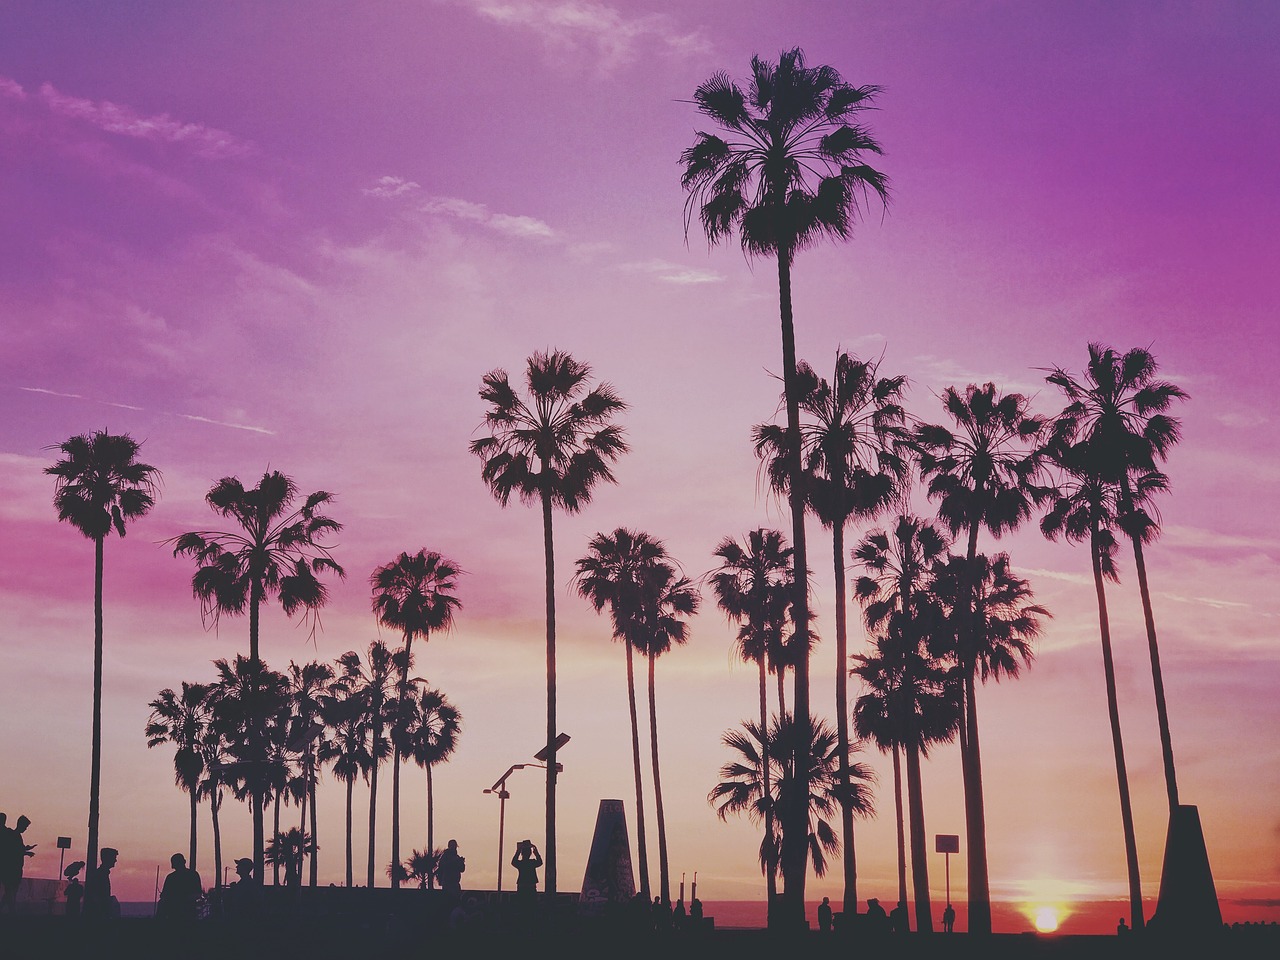 Palm trees in Los Angeles.